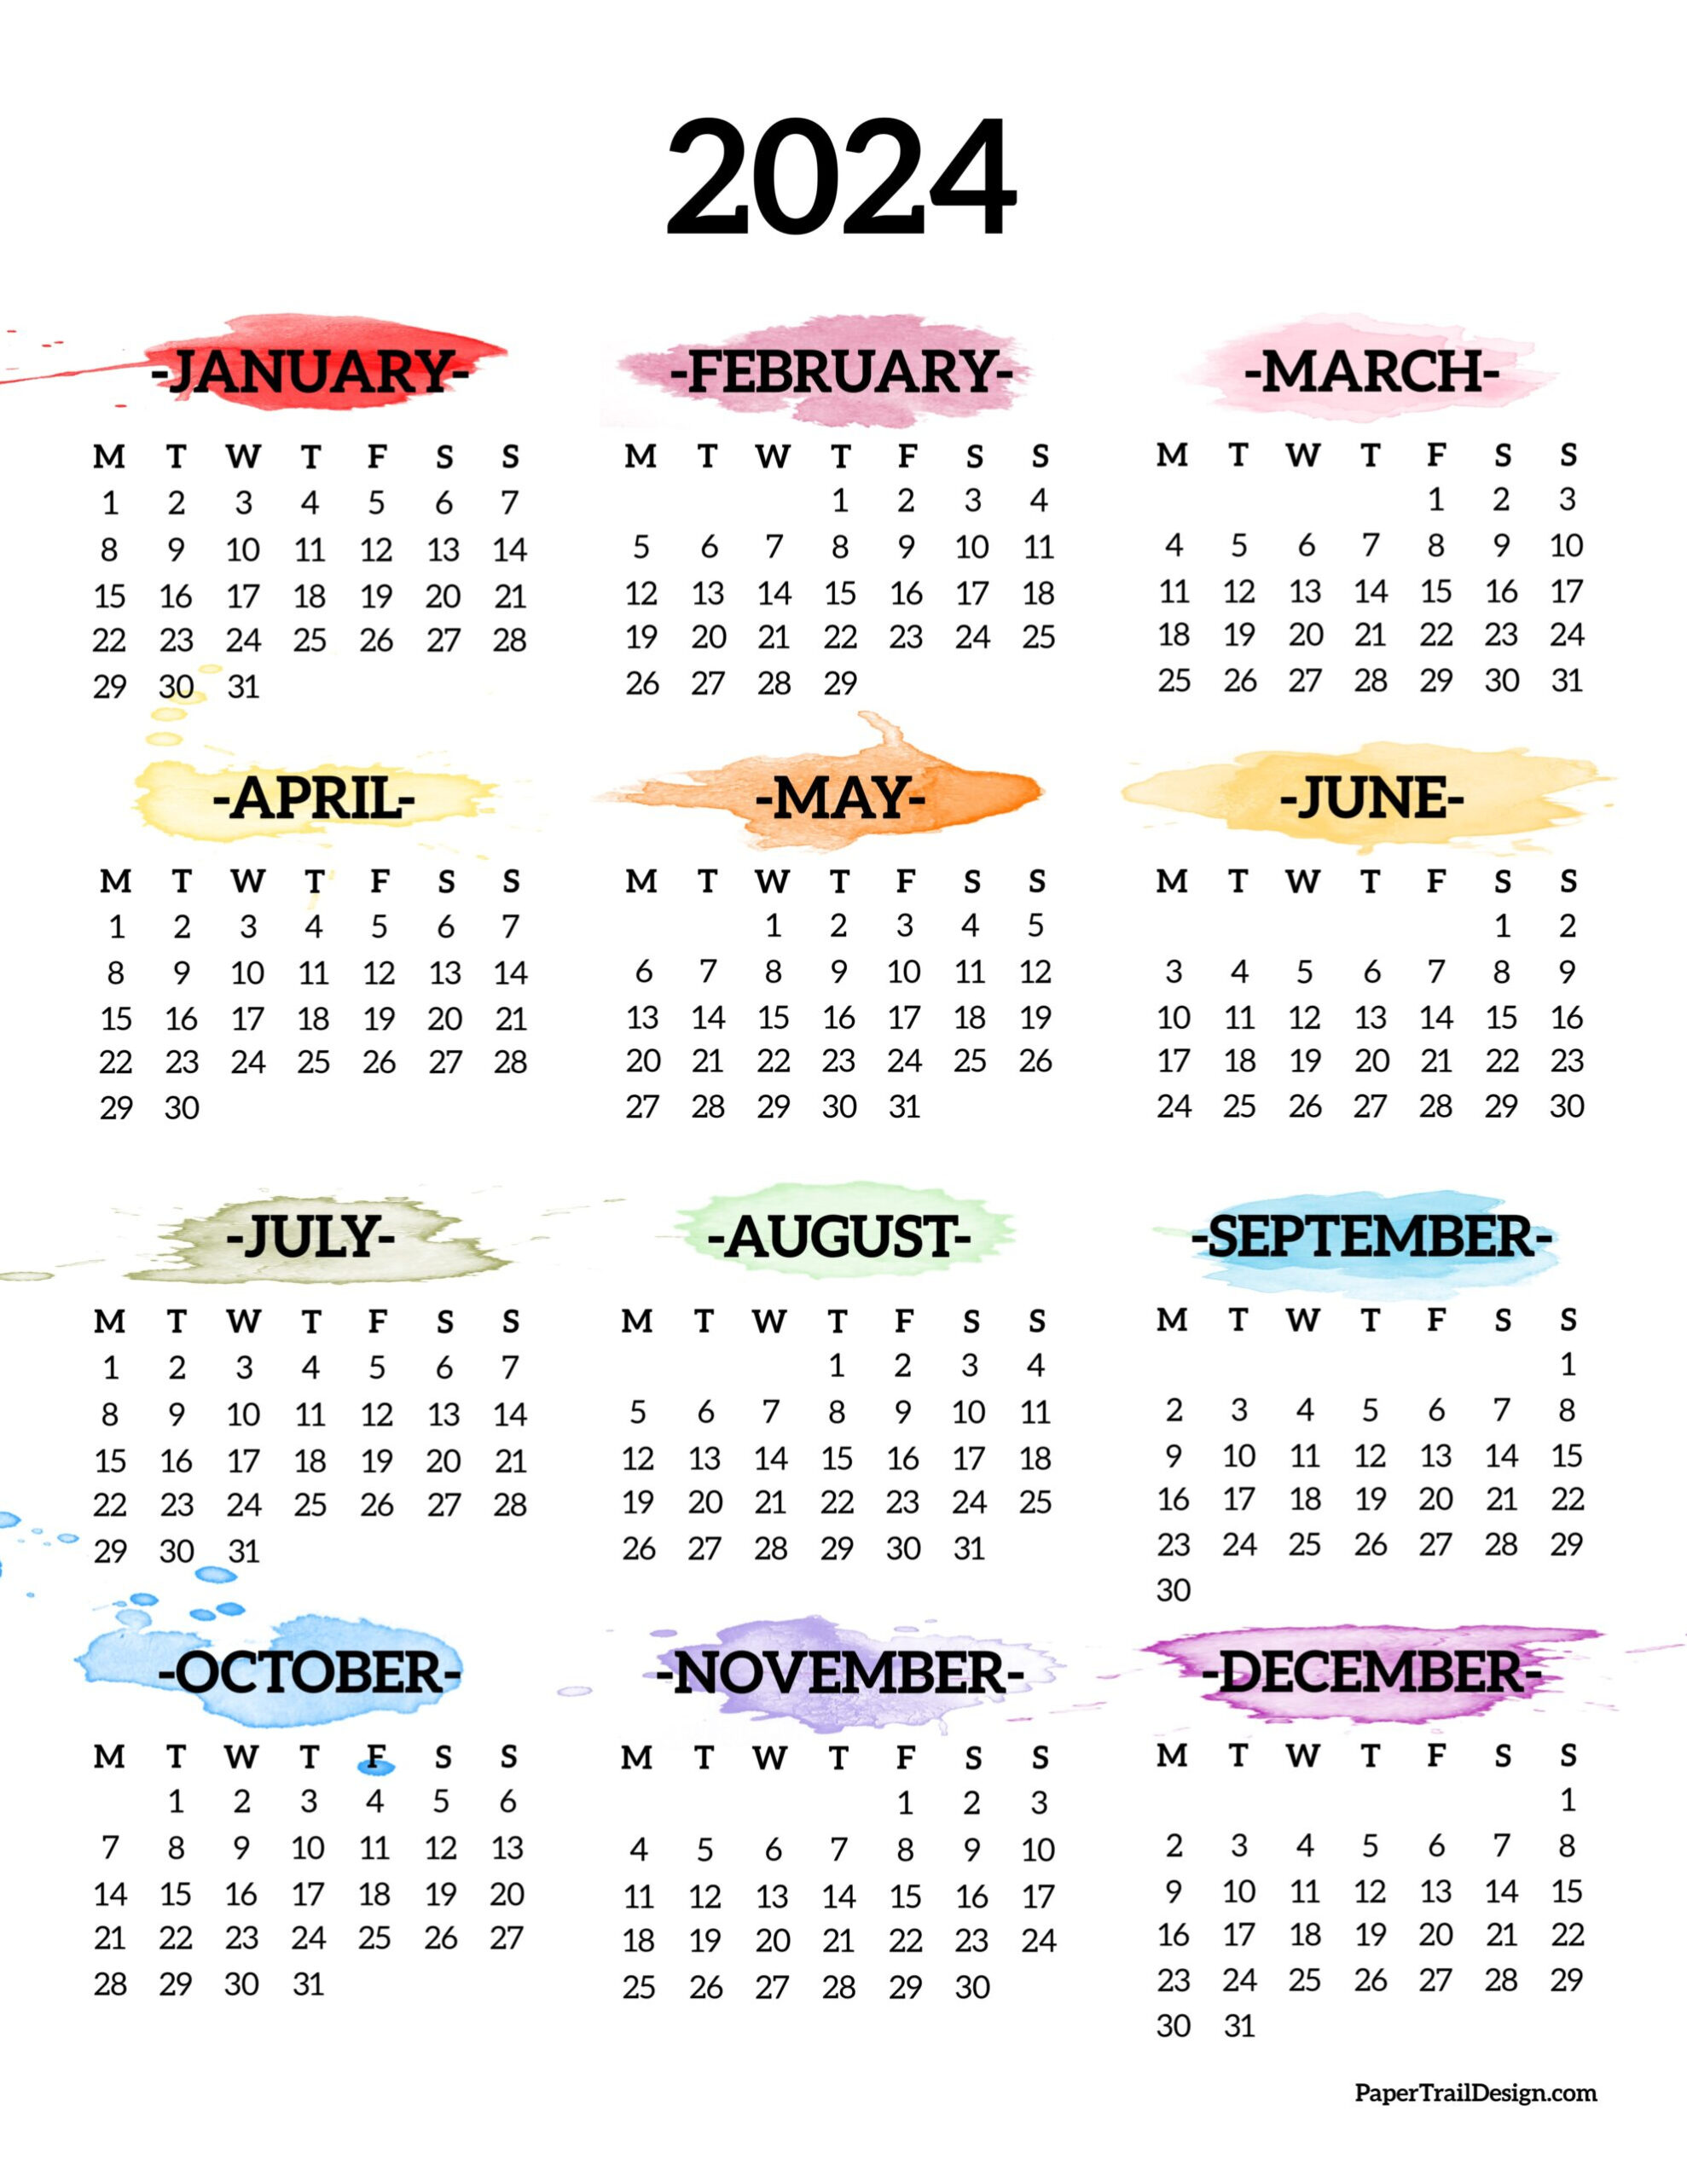 2024 Monday Start Calendar - One Page - Paper Trail Design | 2024 Yearly Calendar One Page